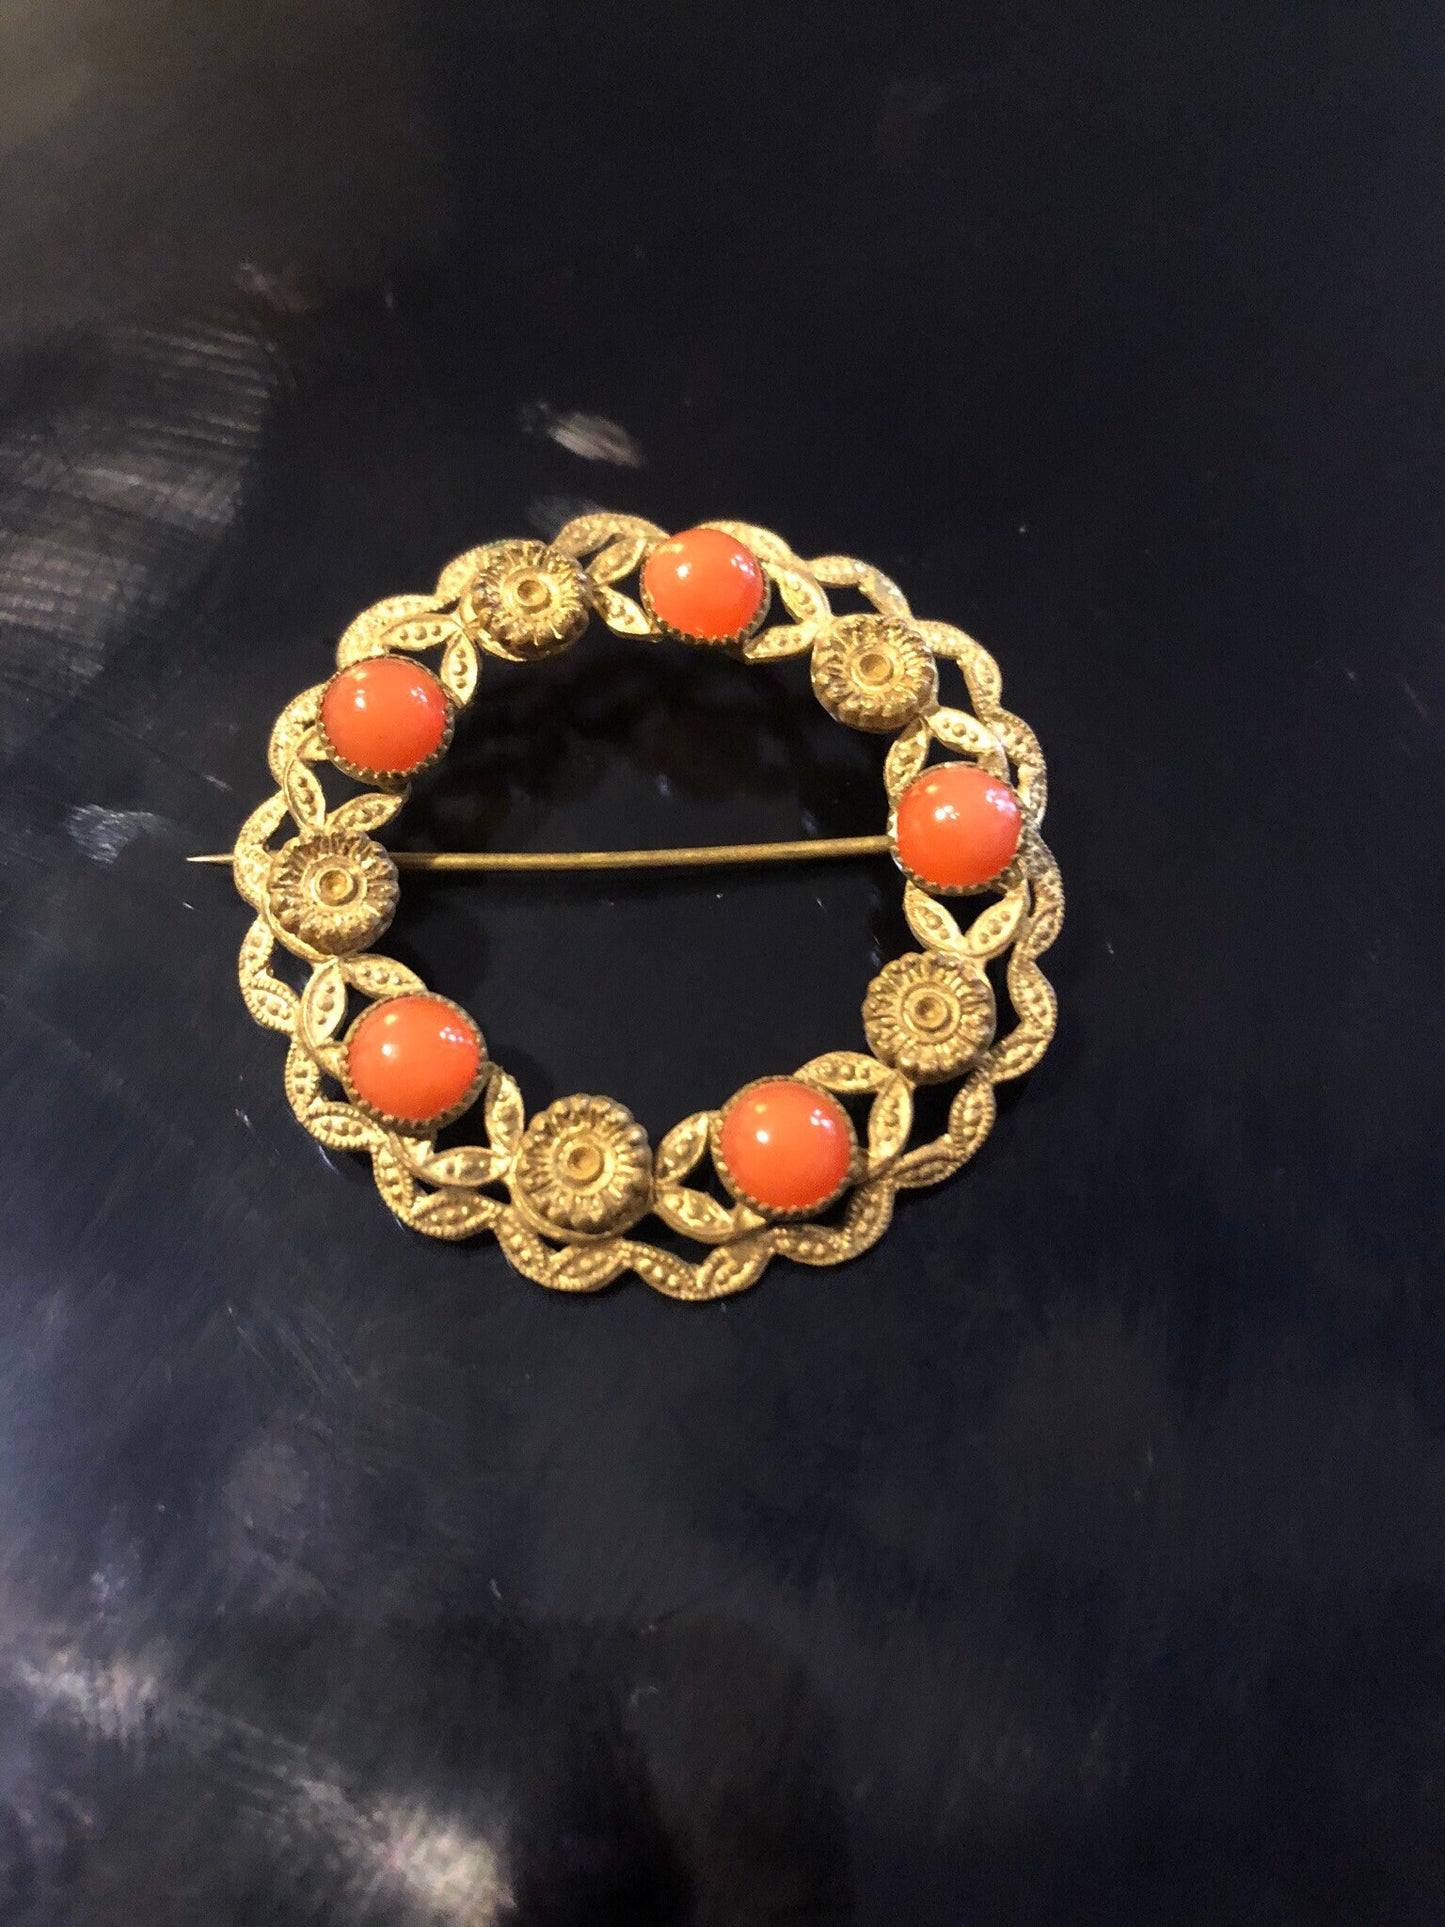 Czech brass gilt metal leaf brooch with faux coral glass cabochons